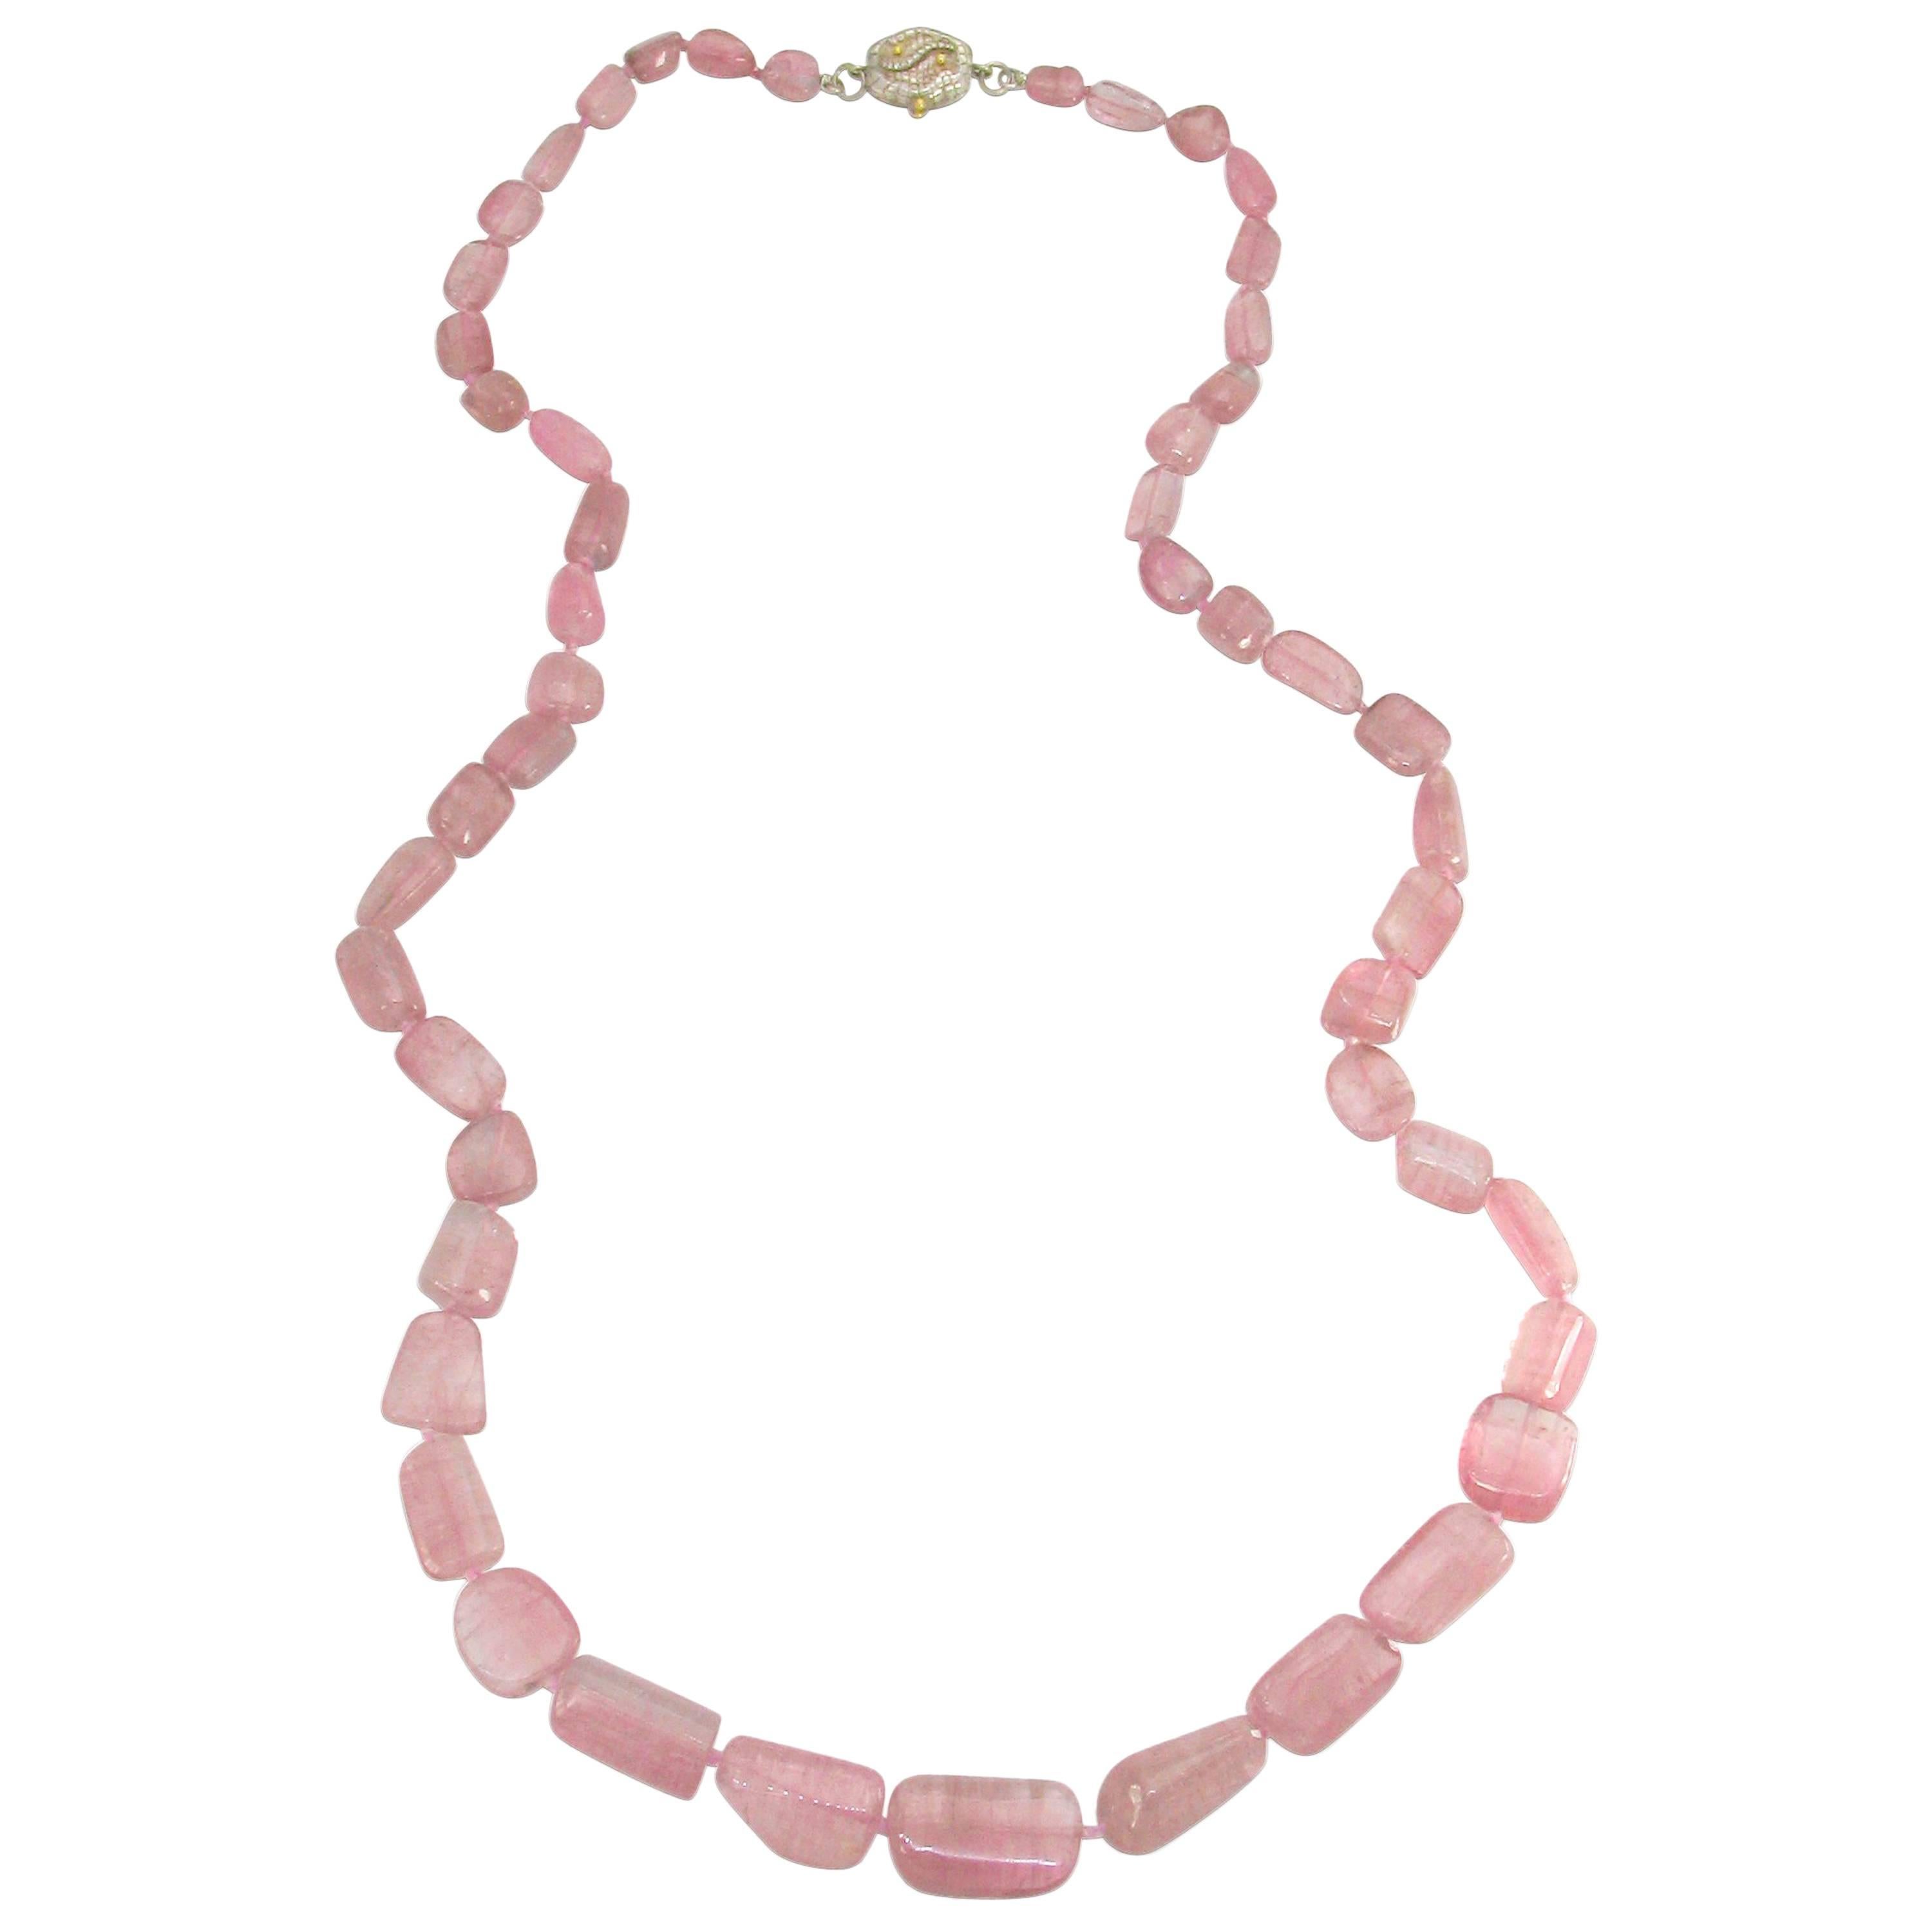 Pink Tourmaline Necklace with Victor Velyan Clamshell Clasp For Sale